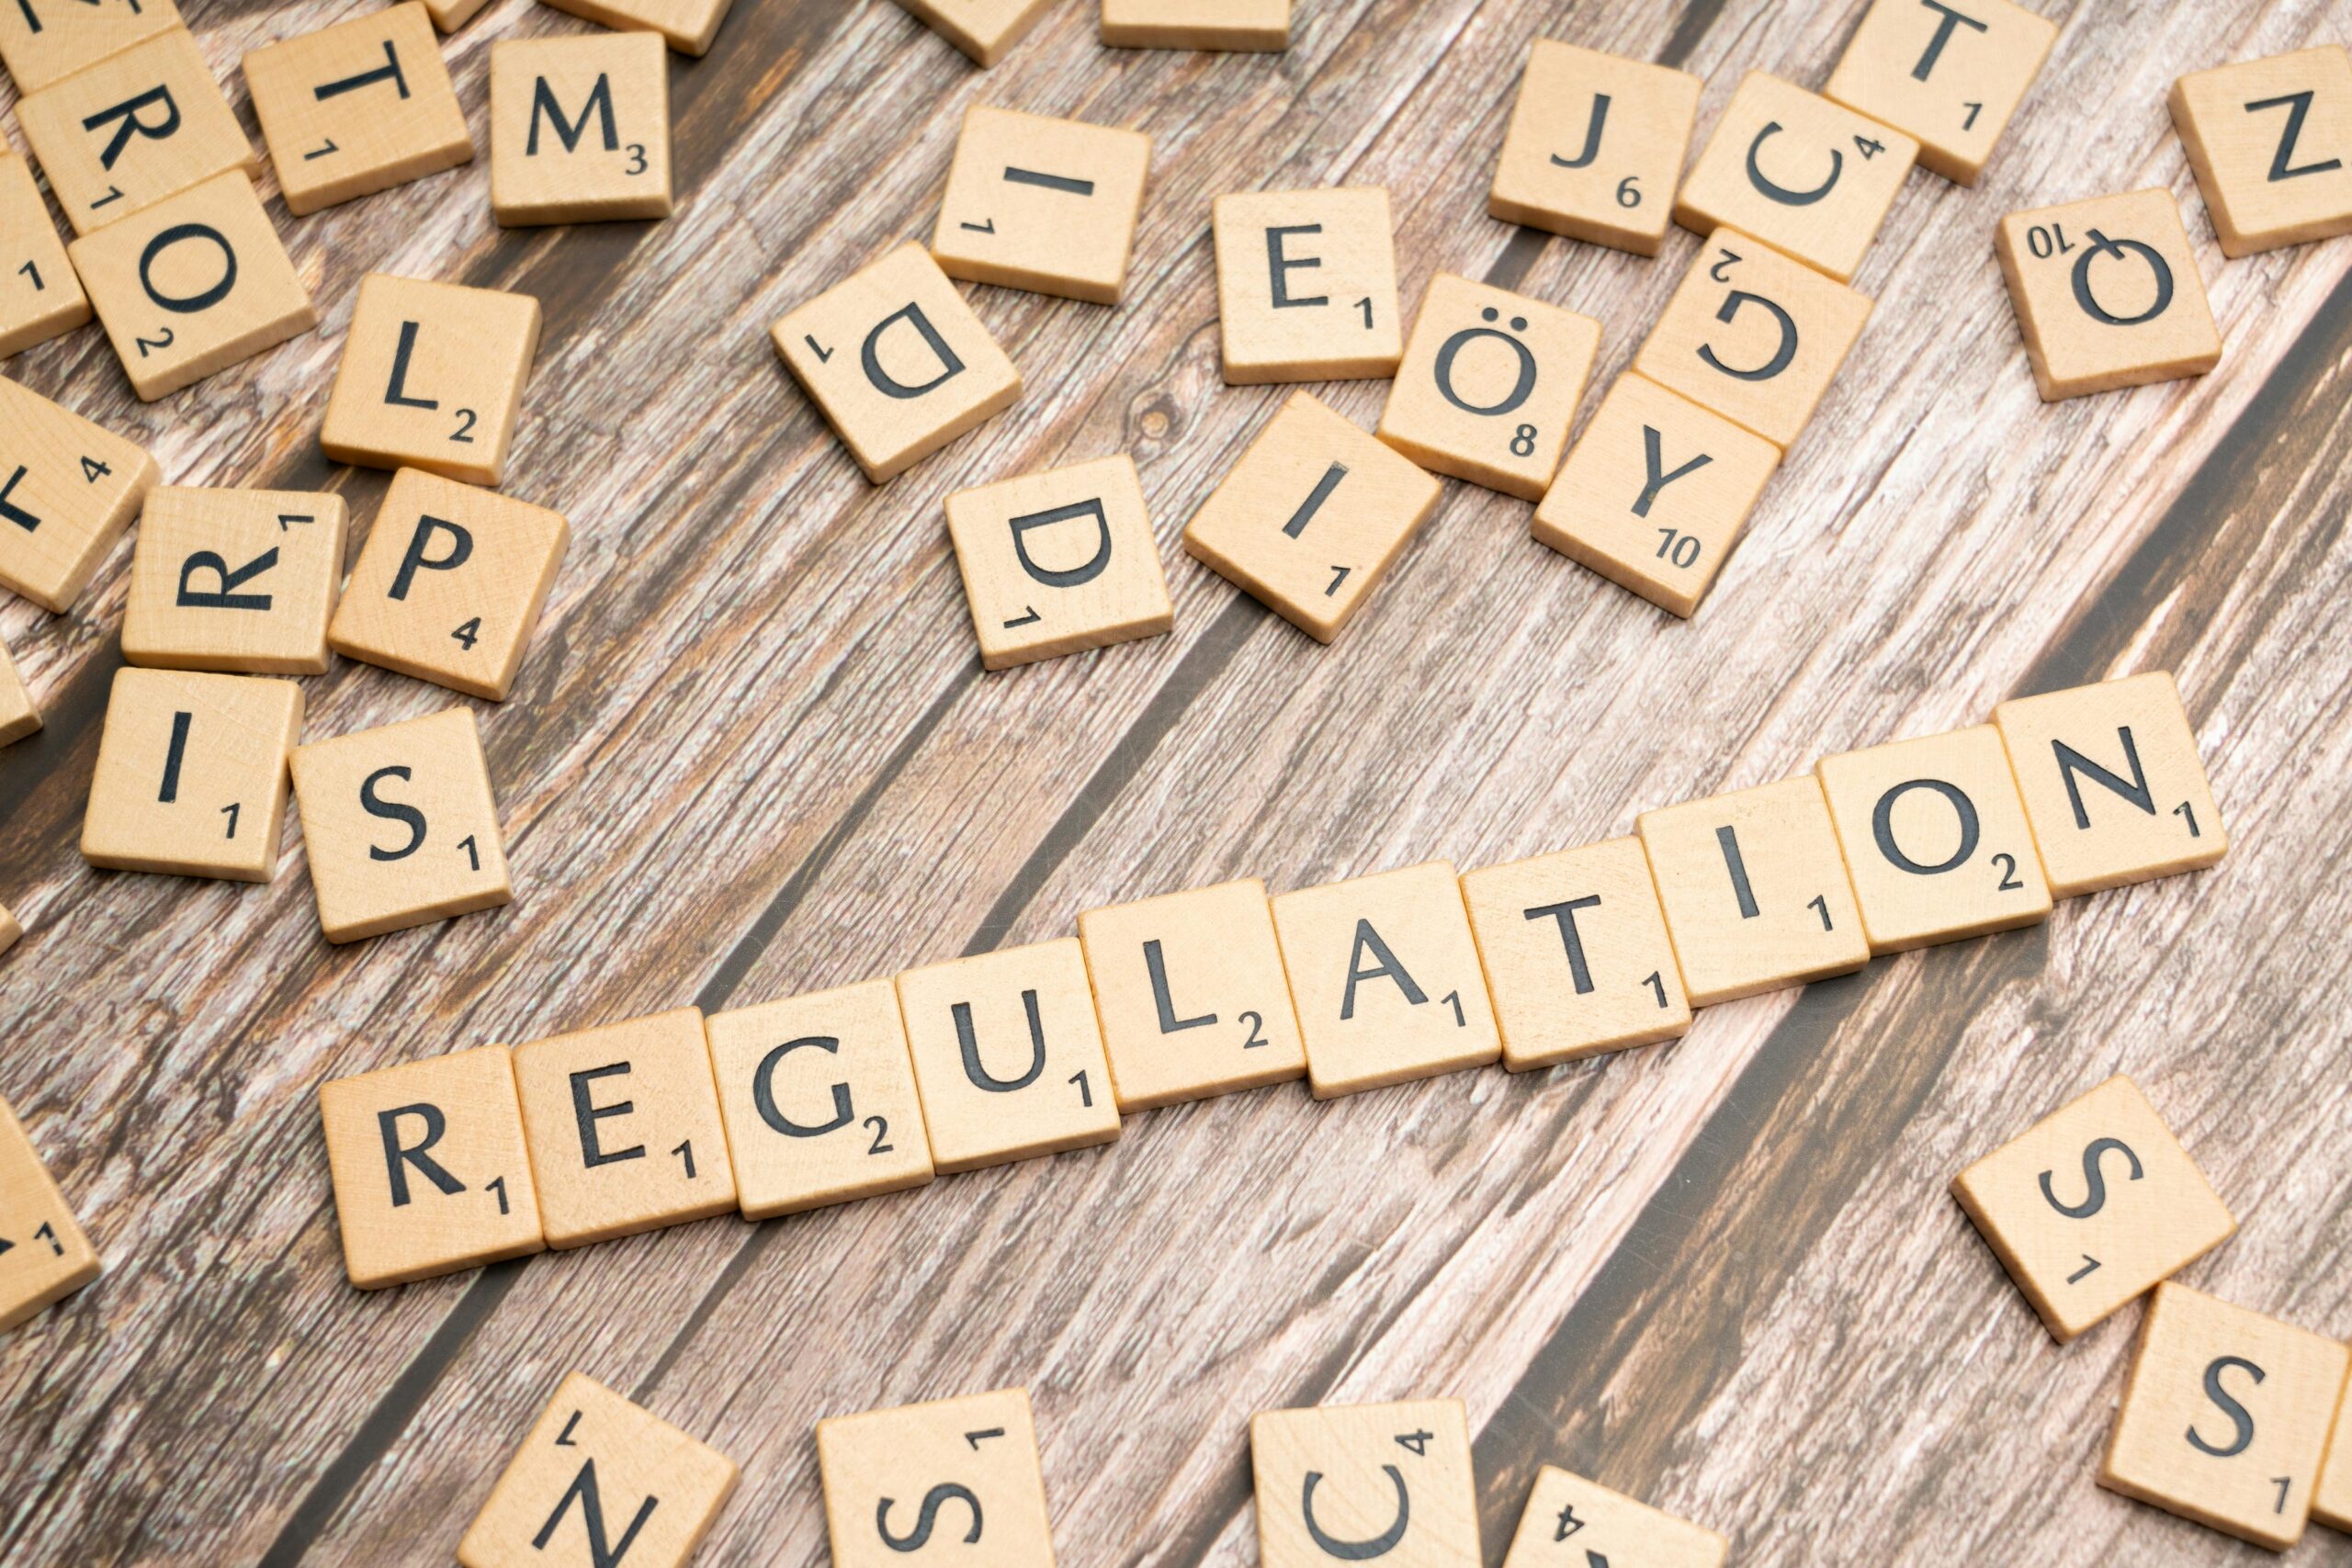 Communication and compliance: how regtechs can stand out in a growing market